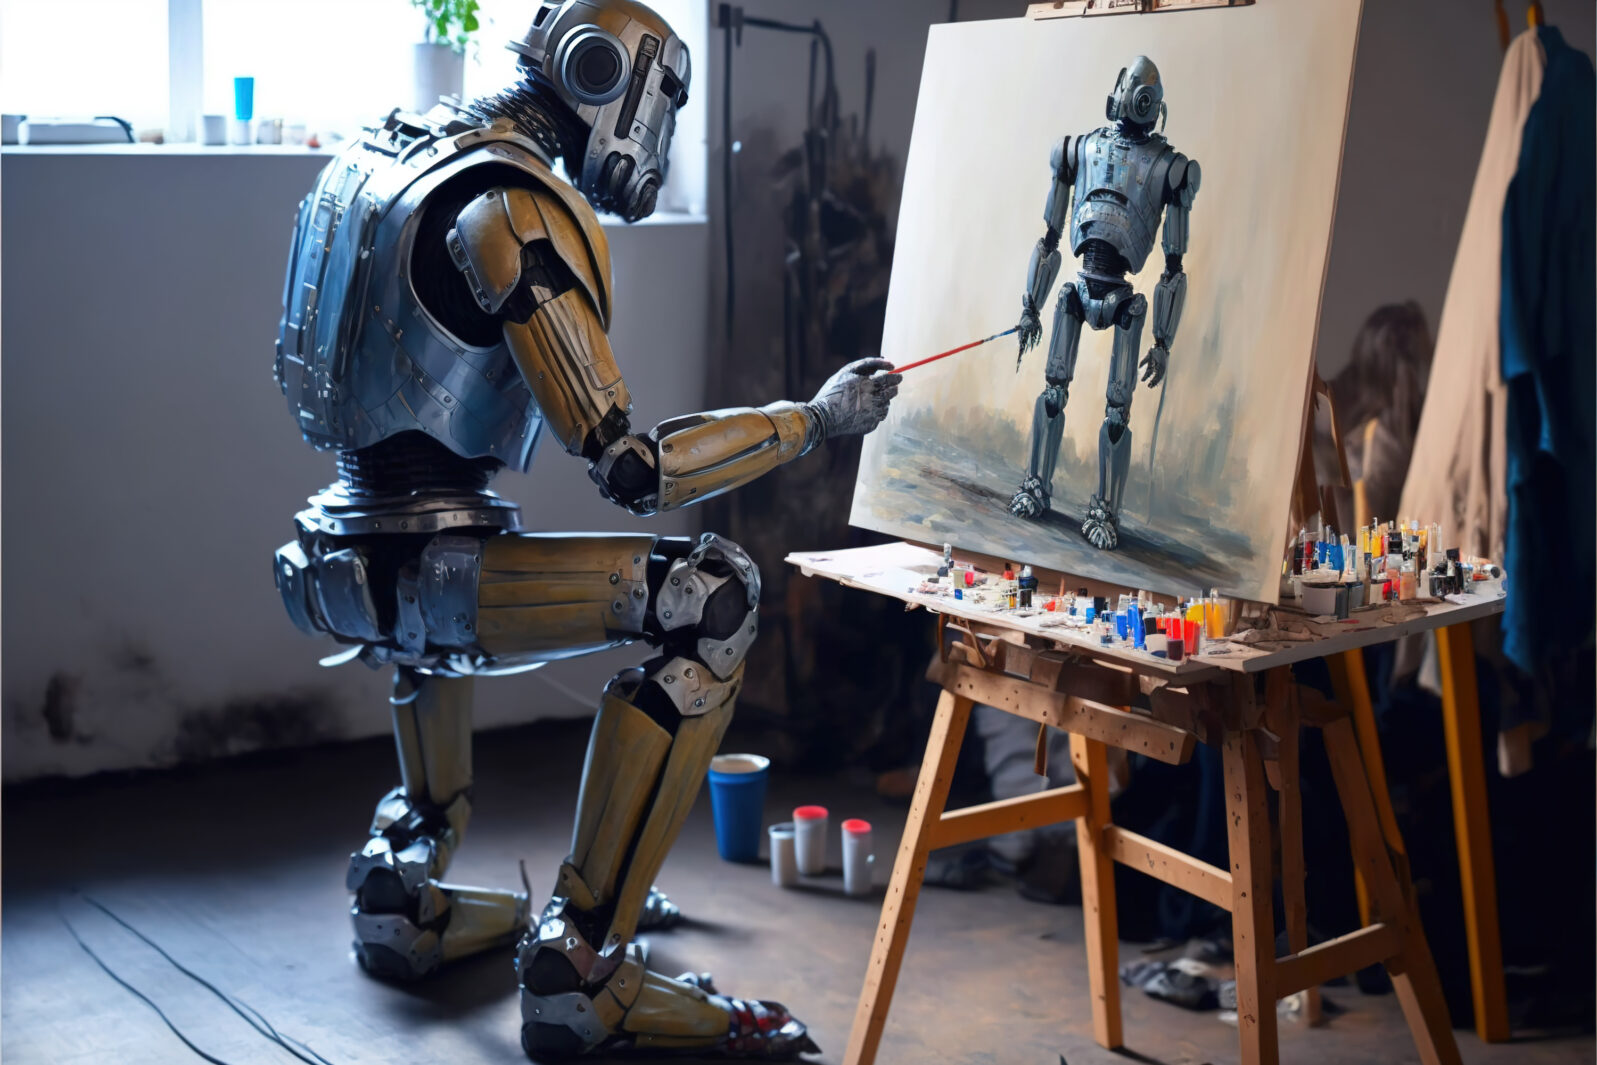 Robot paints picture at home, humanoid robot creating as artist, generative AI.